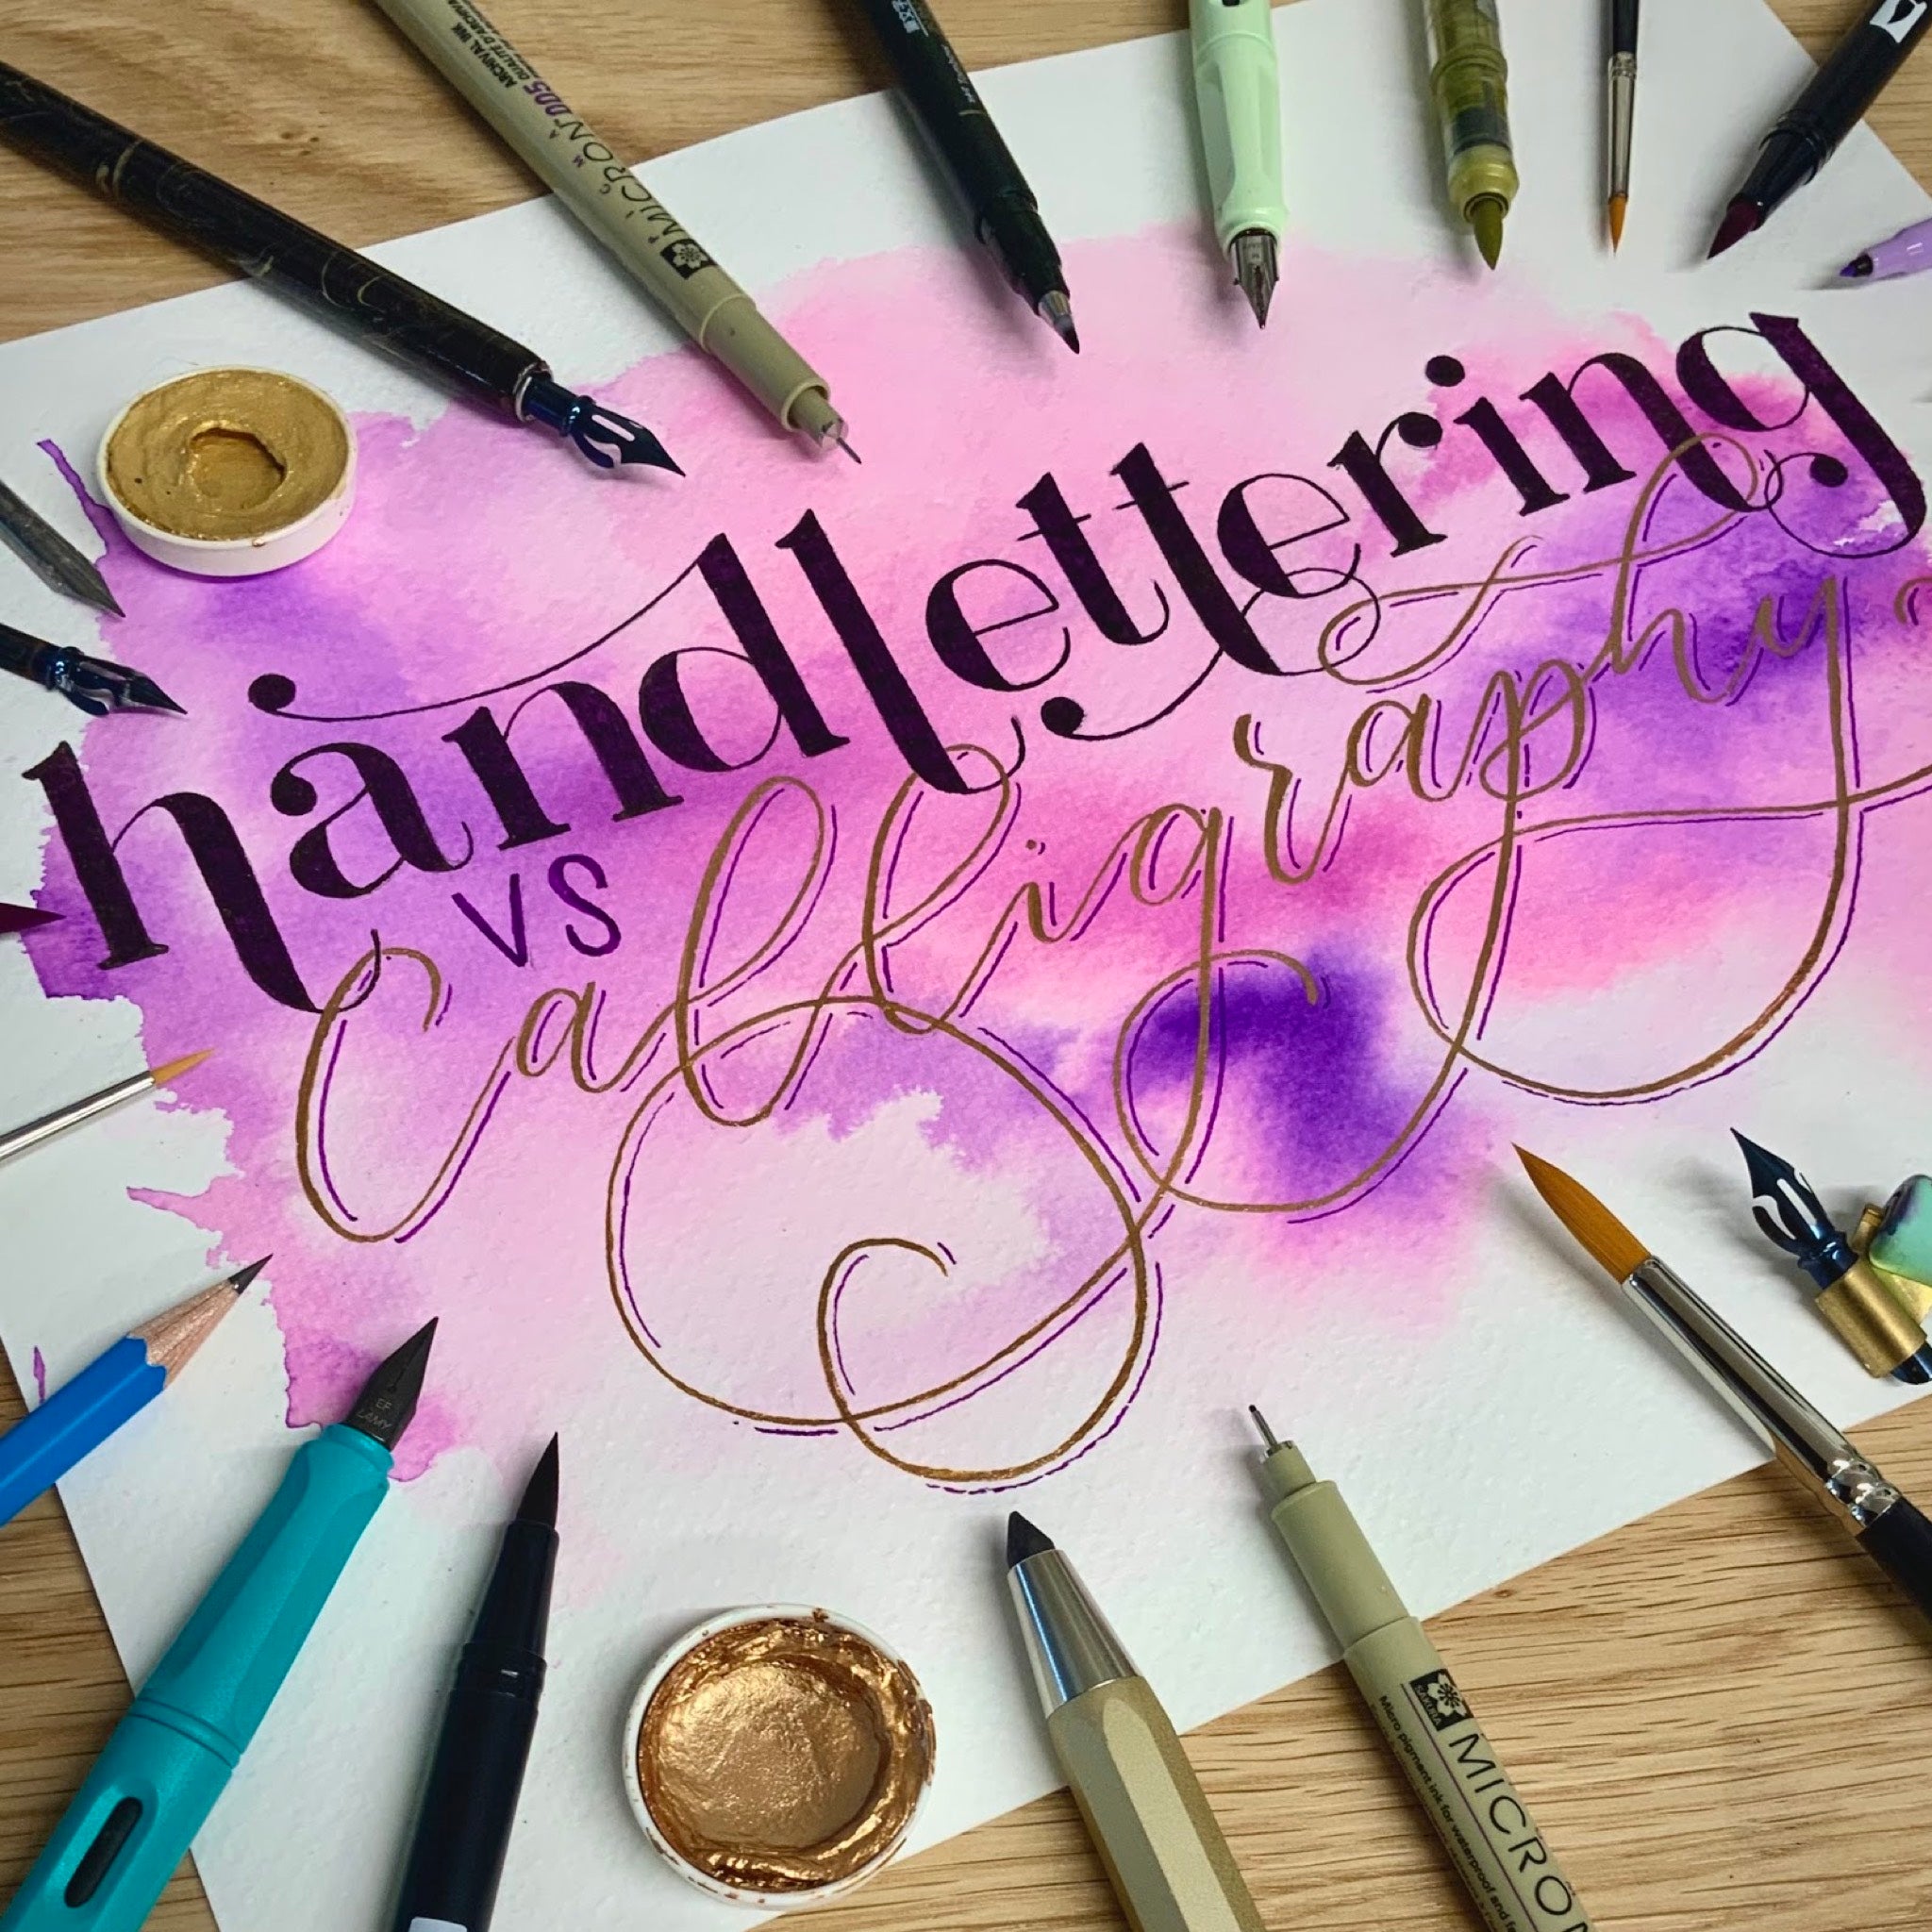 Calligraphy vs Hand Lettering – All Things Analogue